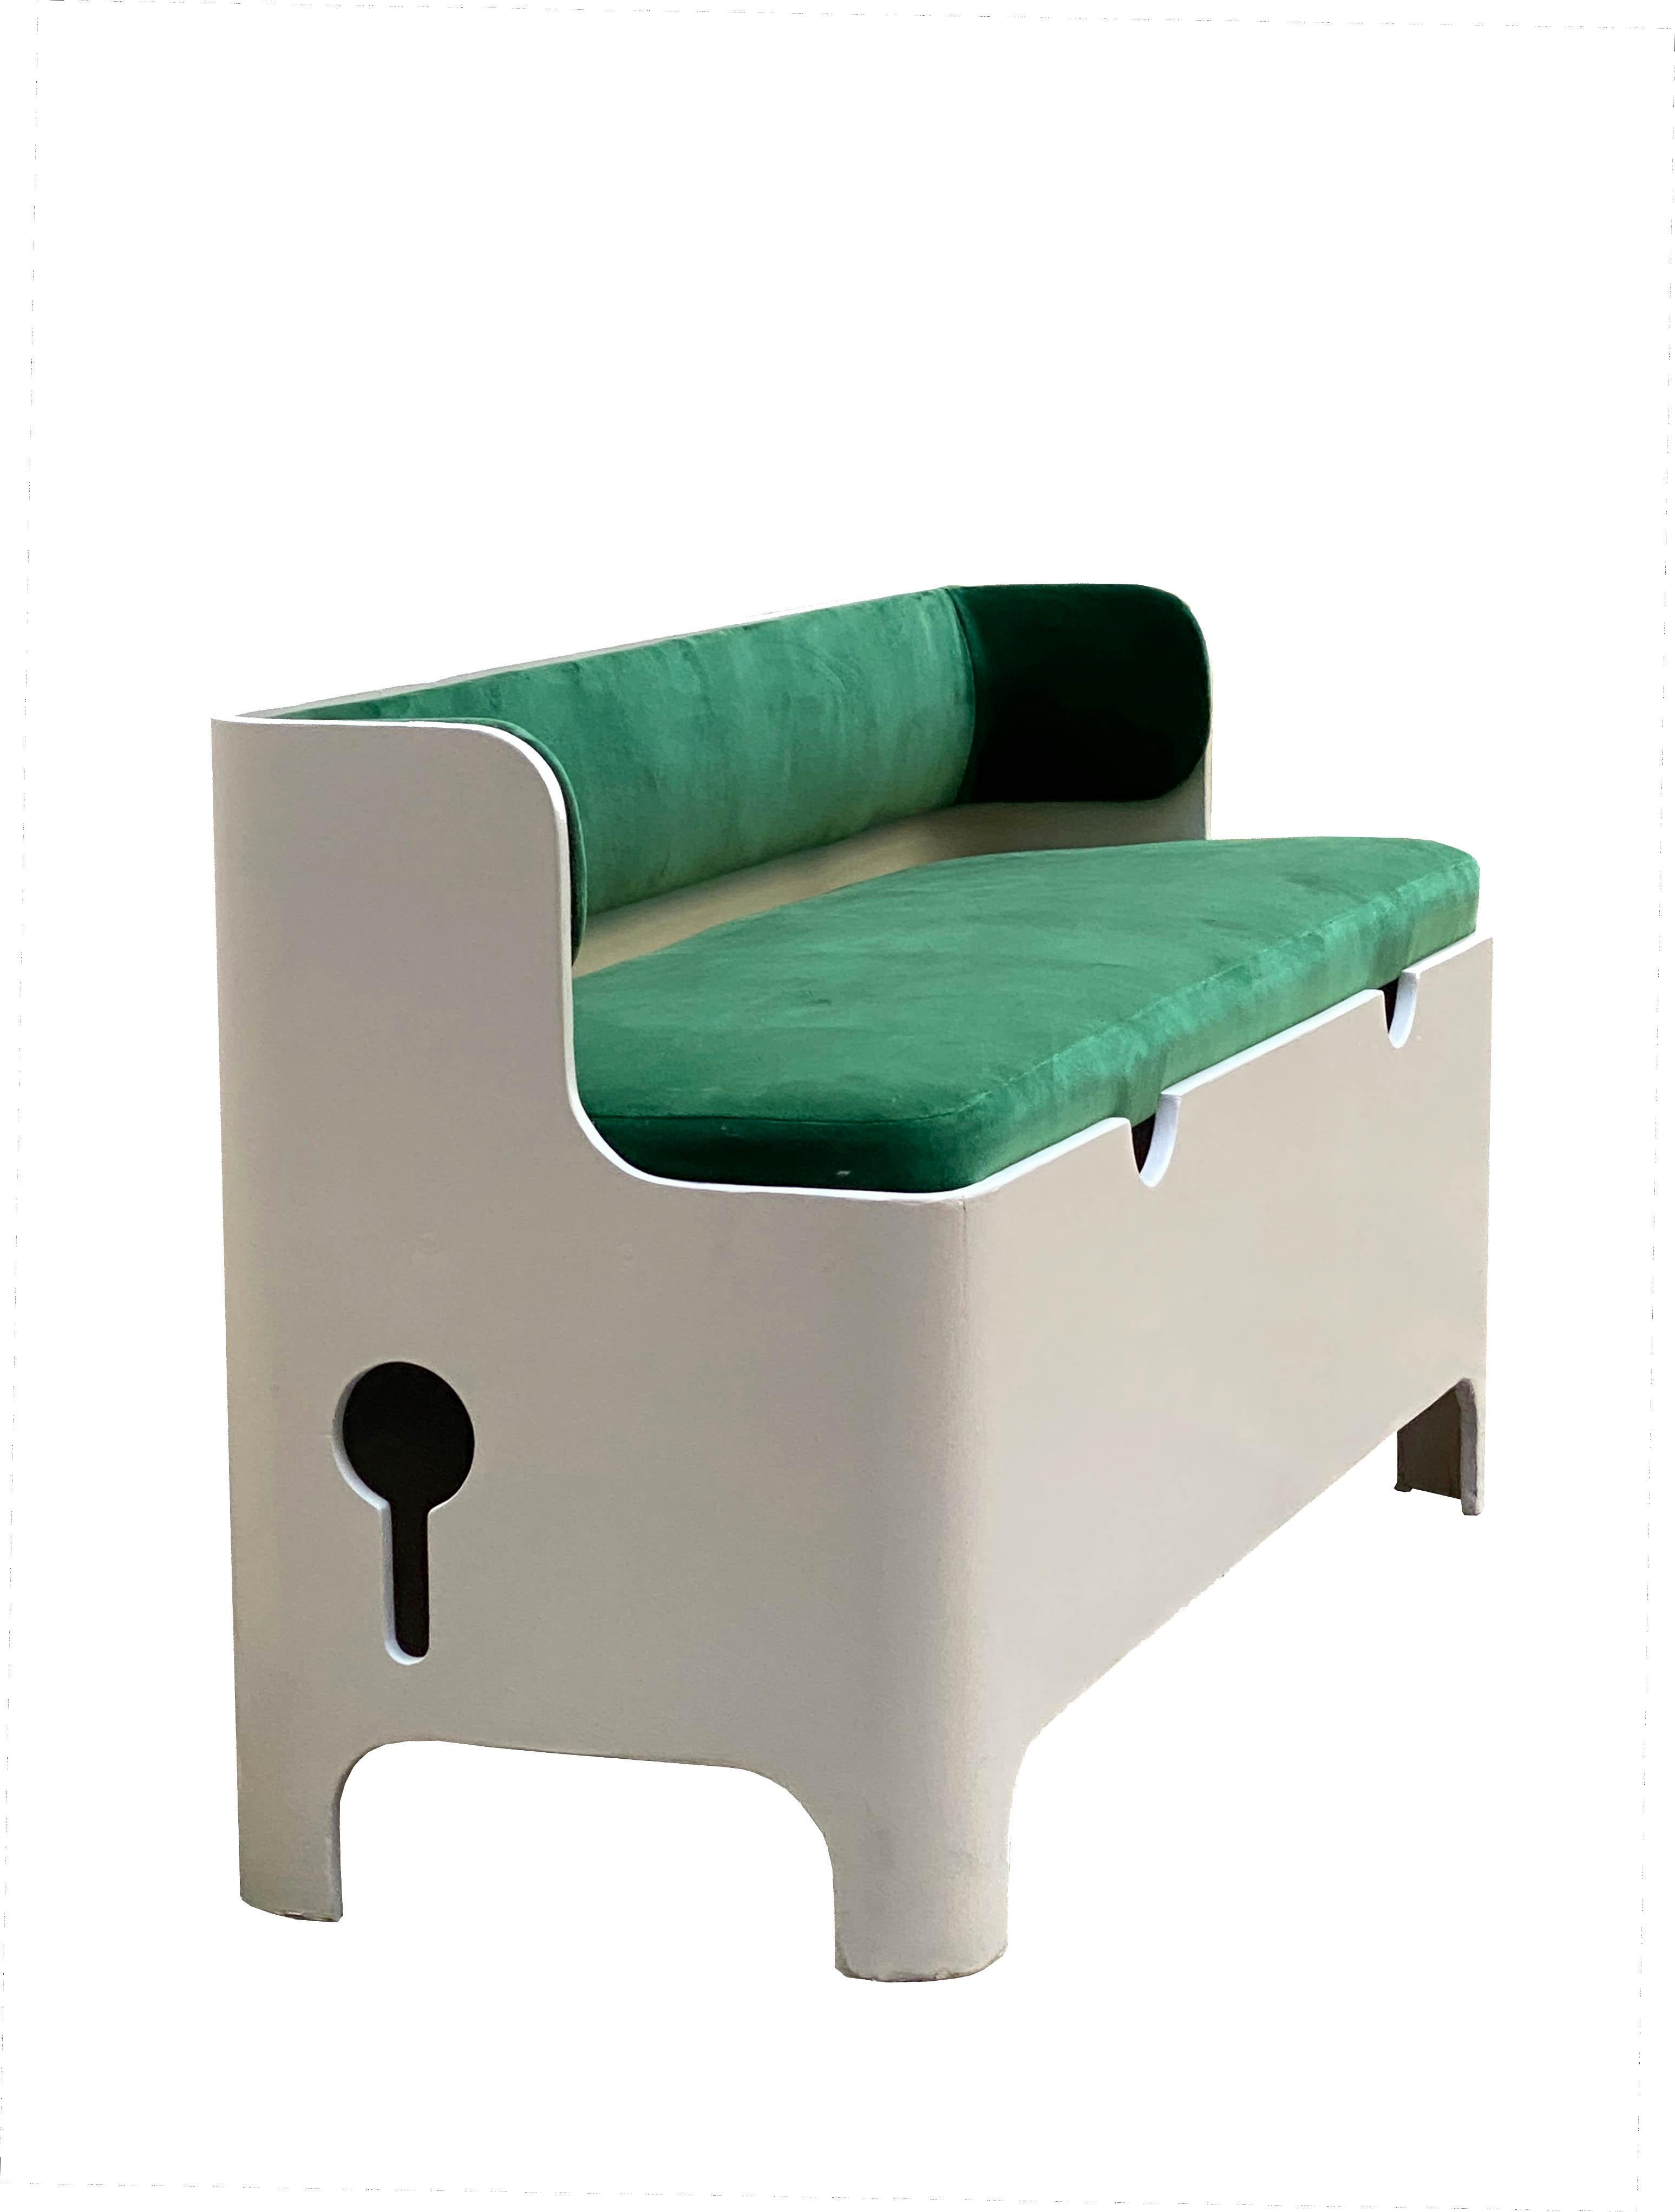 White lacquered plywood and green velvet storage bench, designer Carlo De Carli for Fiarm, Italy 1960.
 